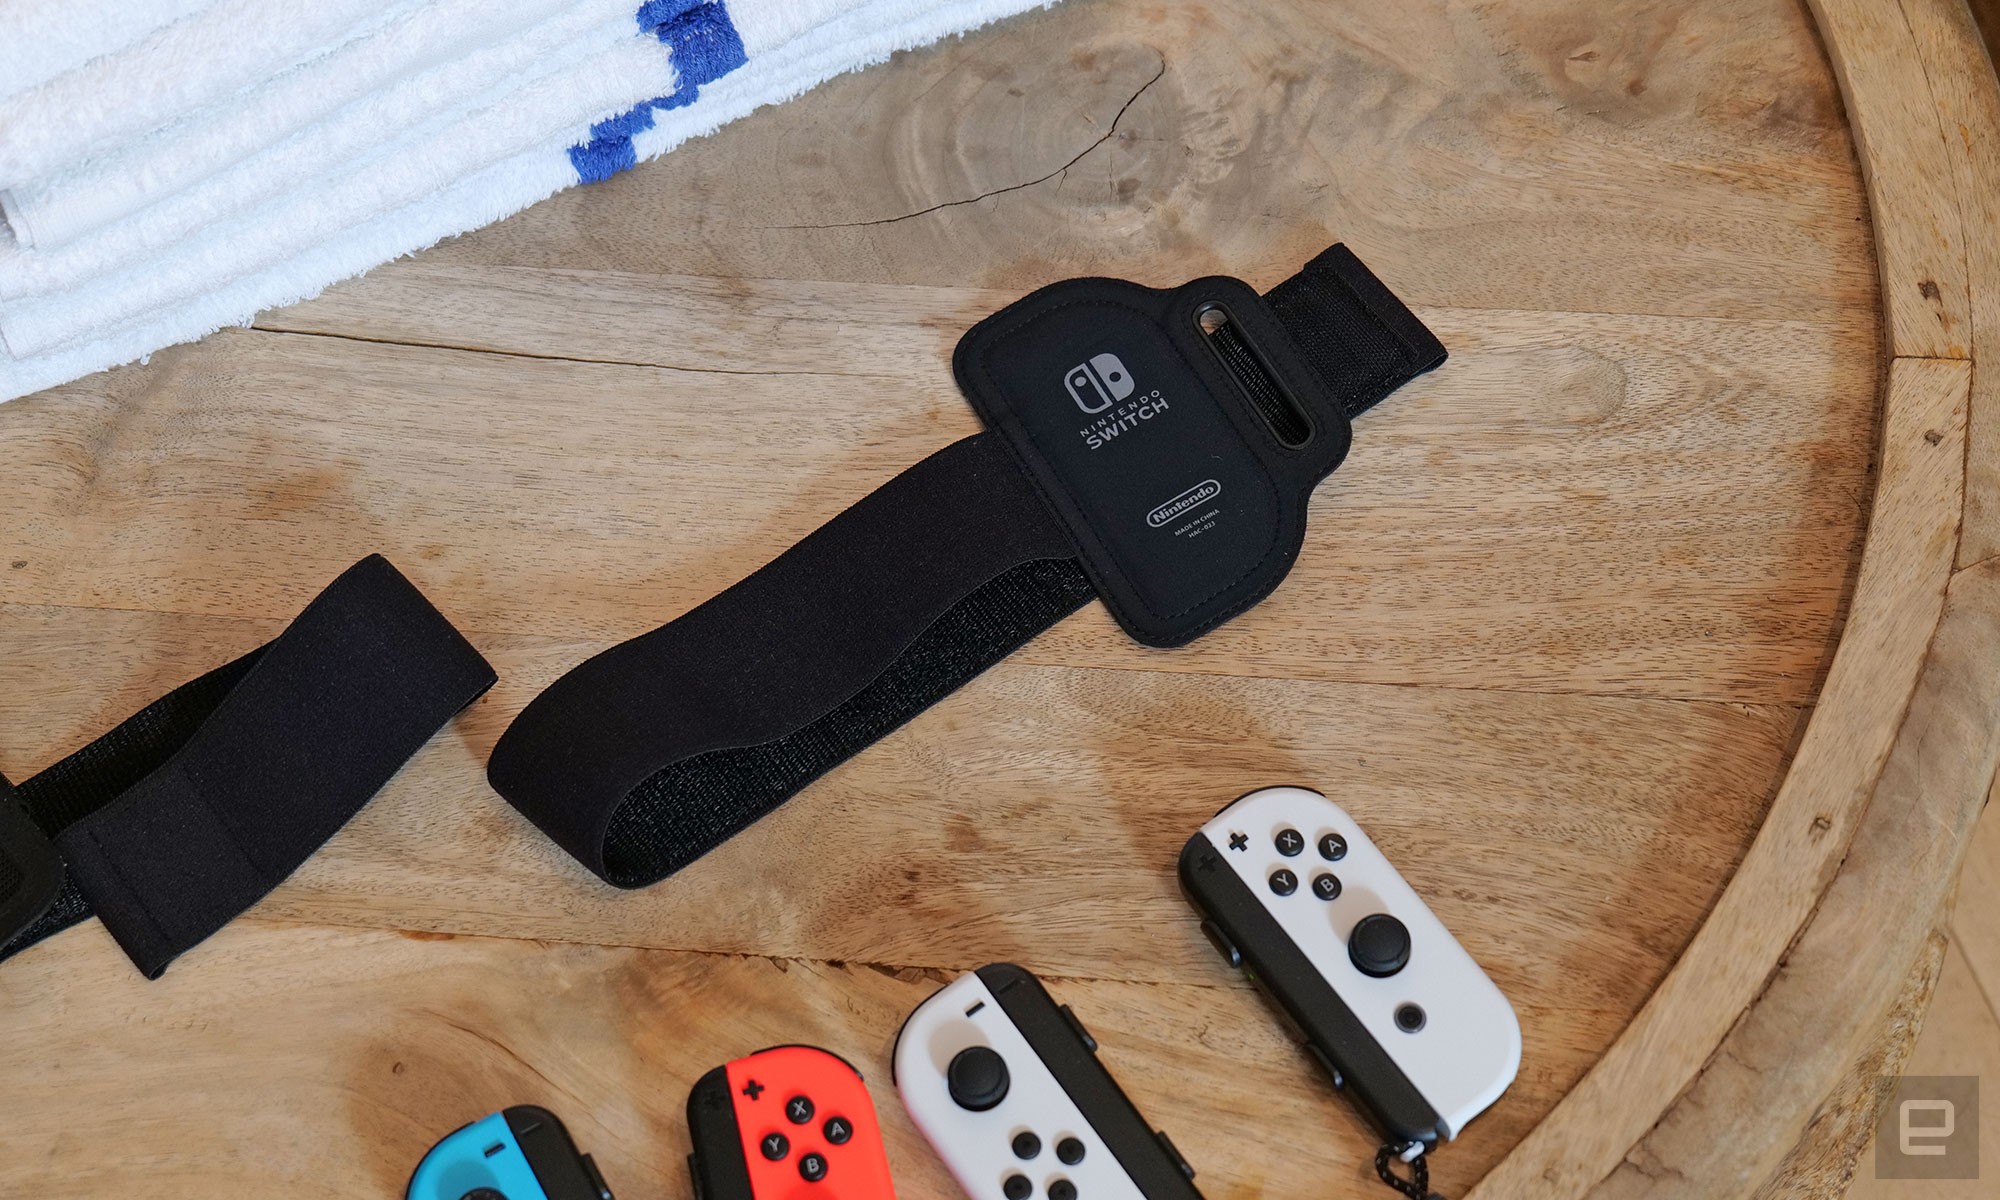 For soccer, you can use Nintendo's leg strap accessory to enable motion controls in shootout mode (and in the main game mode later this summer). 